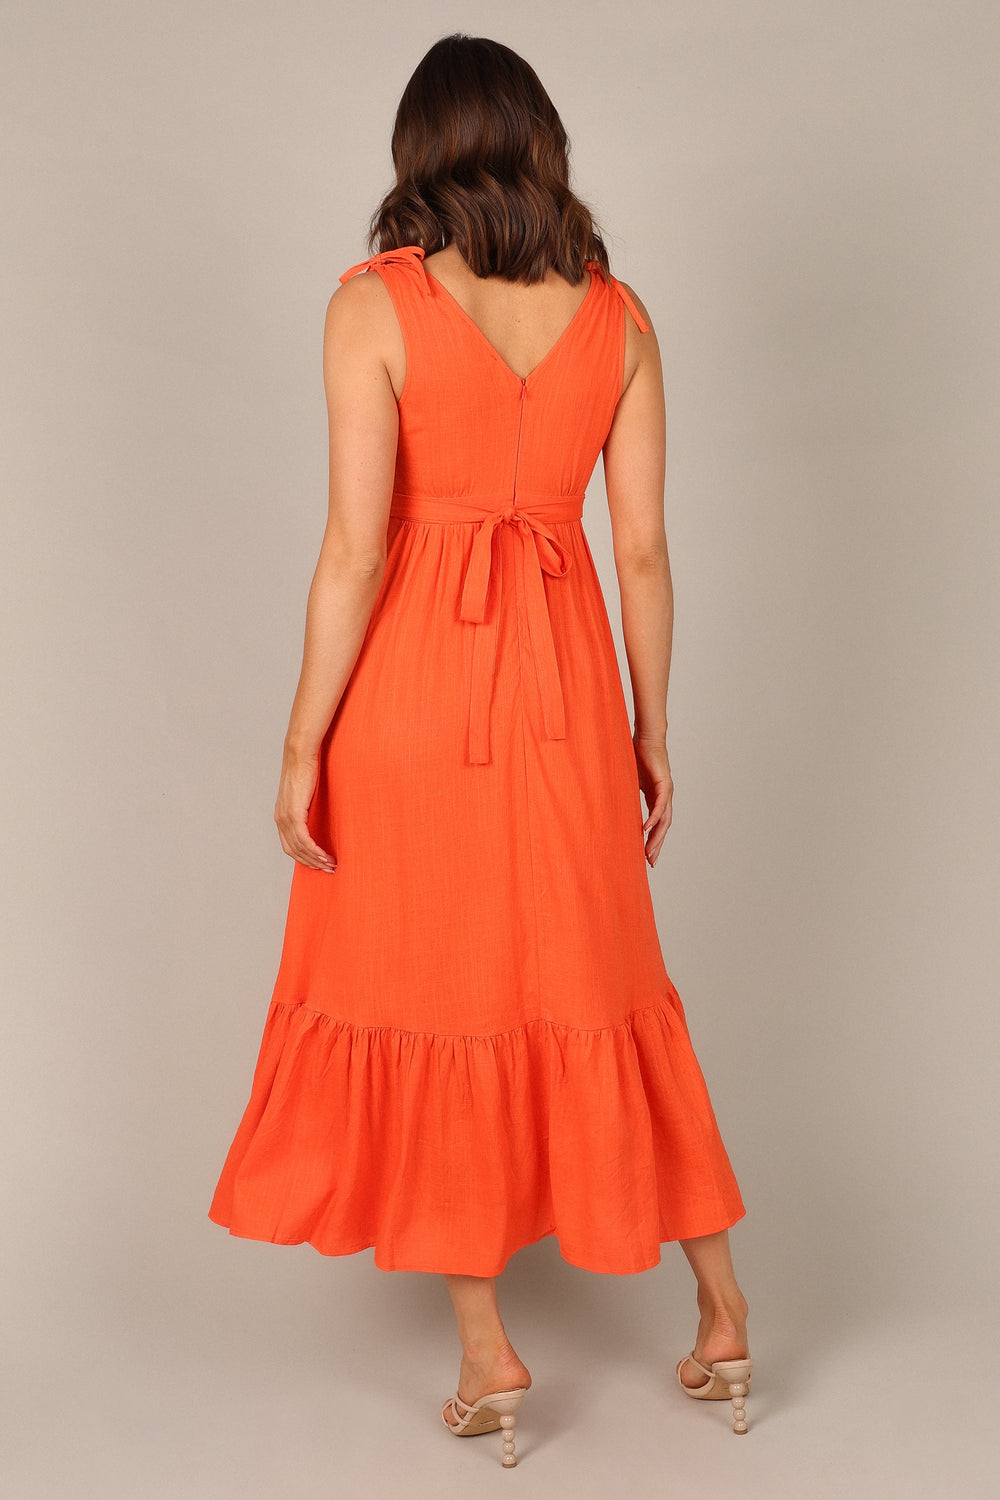 DRESSES @Ally Tie Up Shoulder Strap Maxi Dress - Coral Red